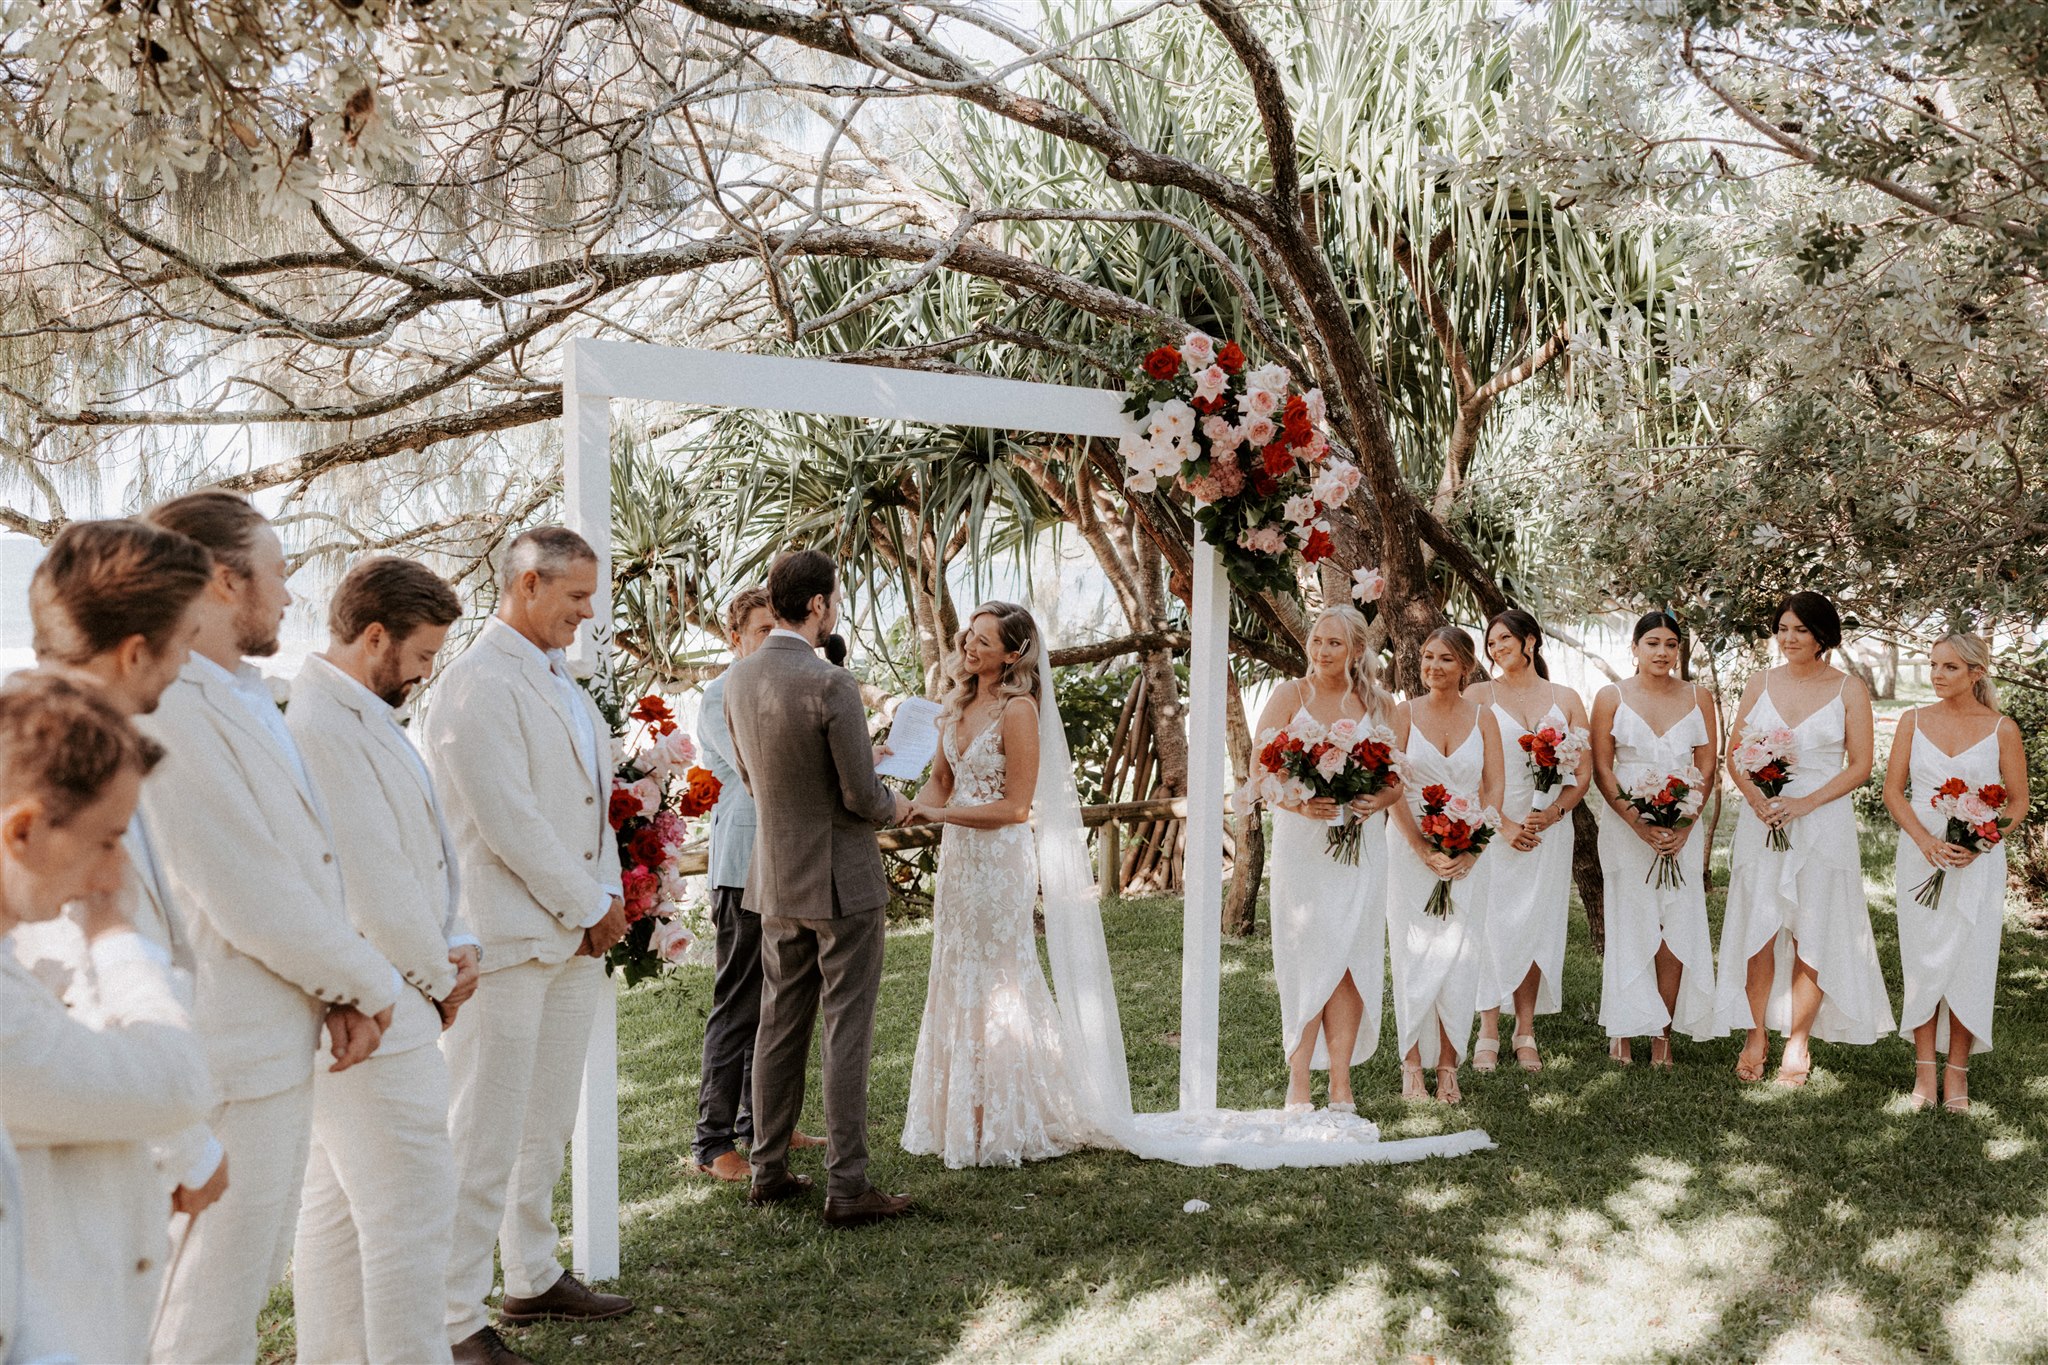 9 Planning Tips for Outdoor Weddings on the Sunshine Coast